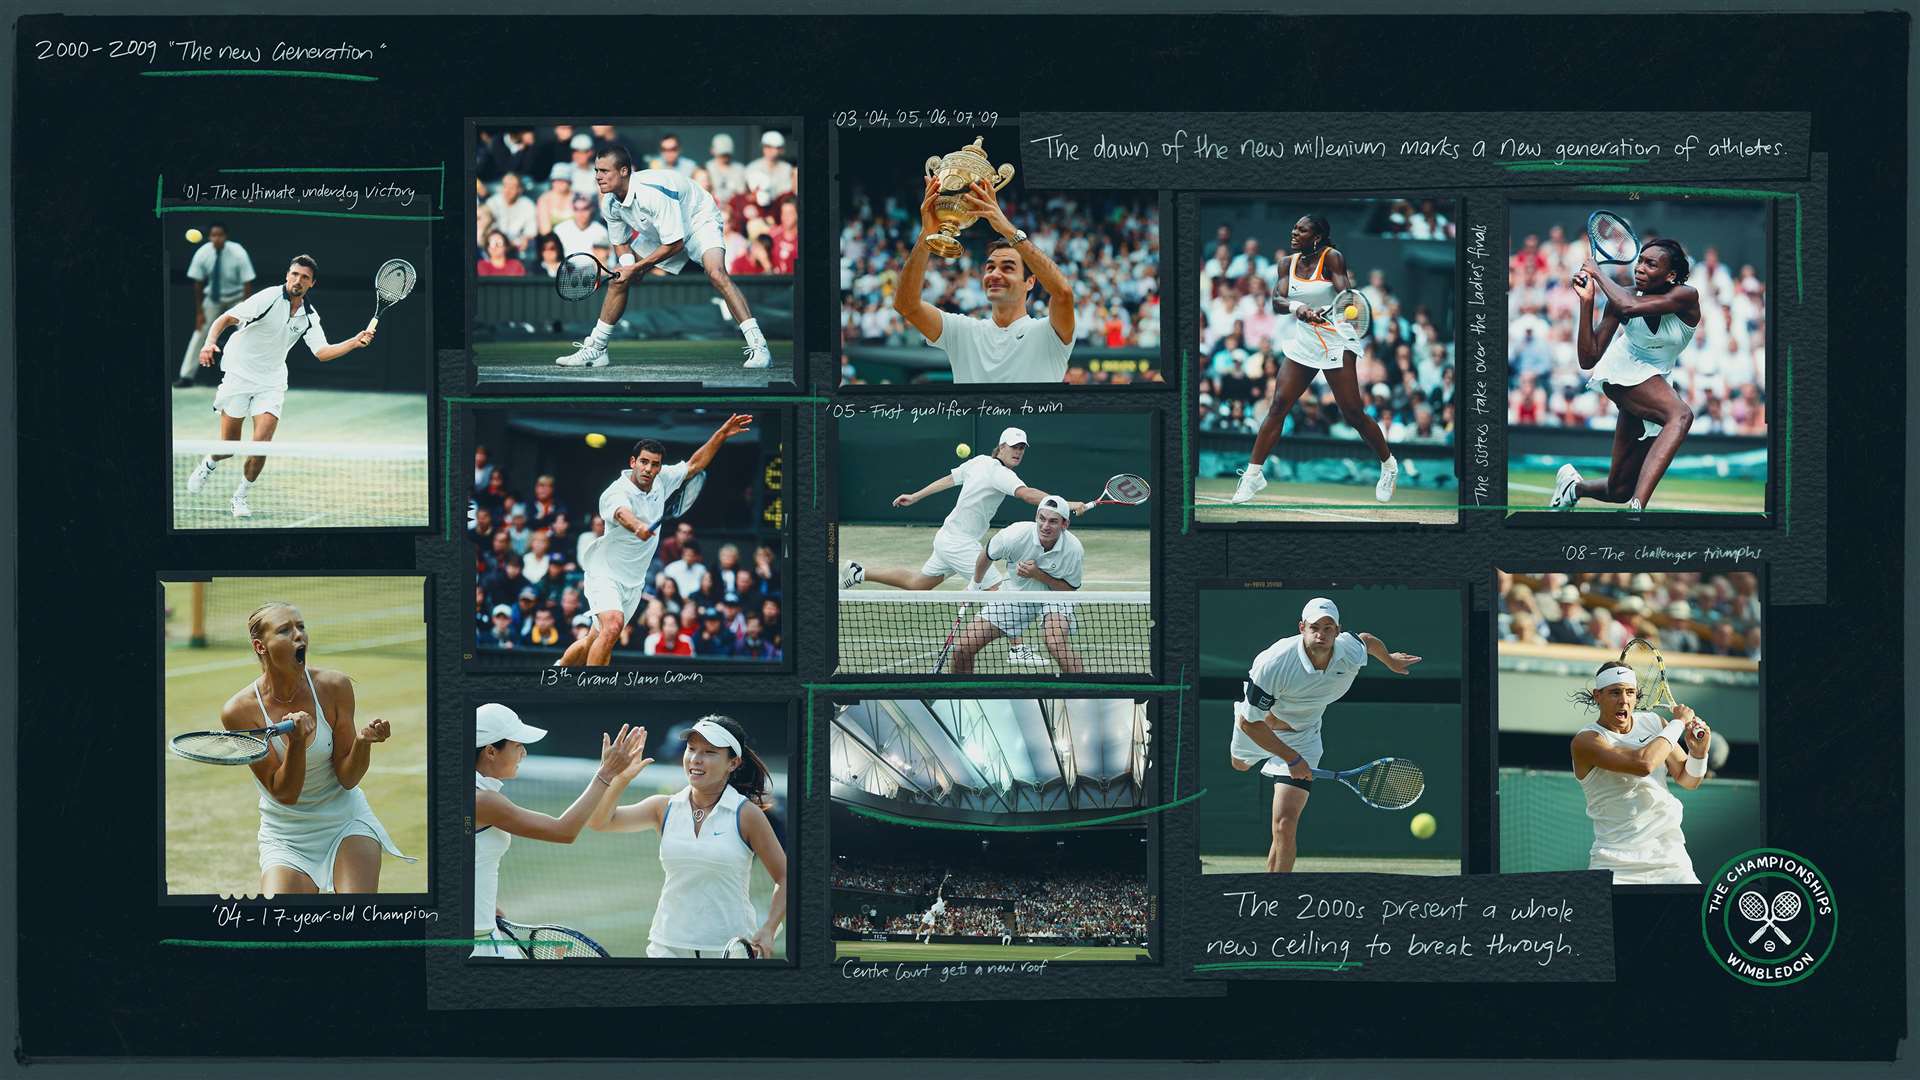 An NFT in the Wimbledon Centenary Collection representing the decade 2000-2009 (AELTC).